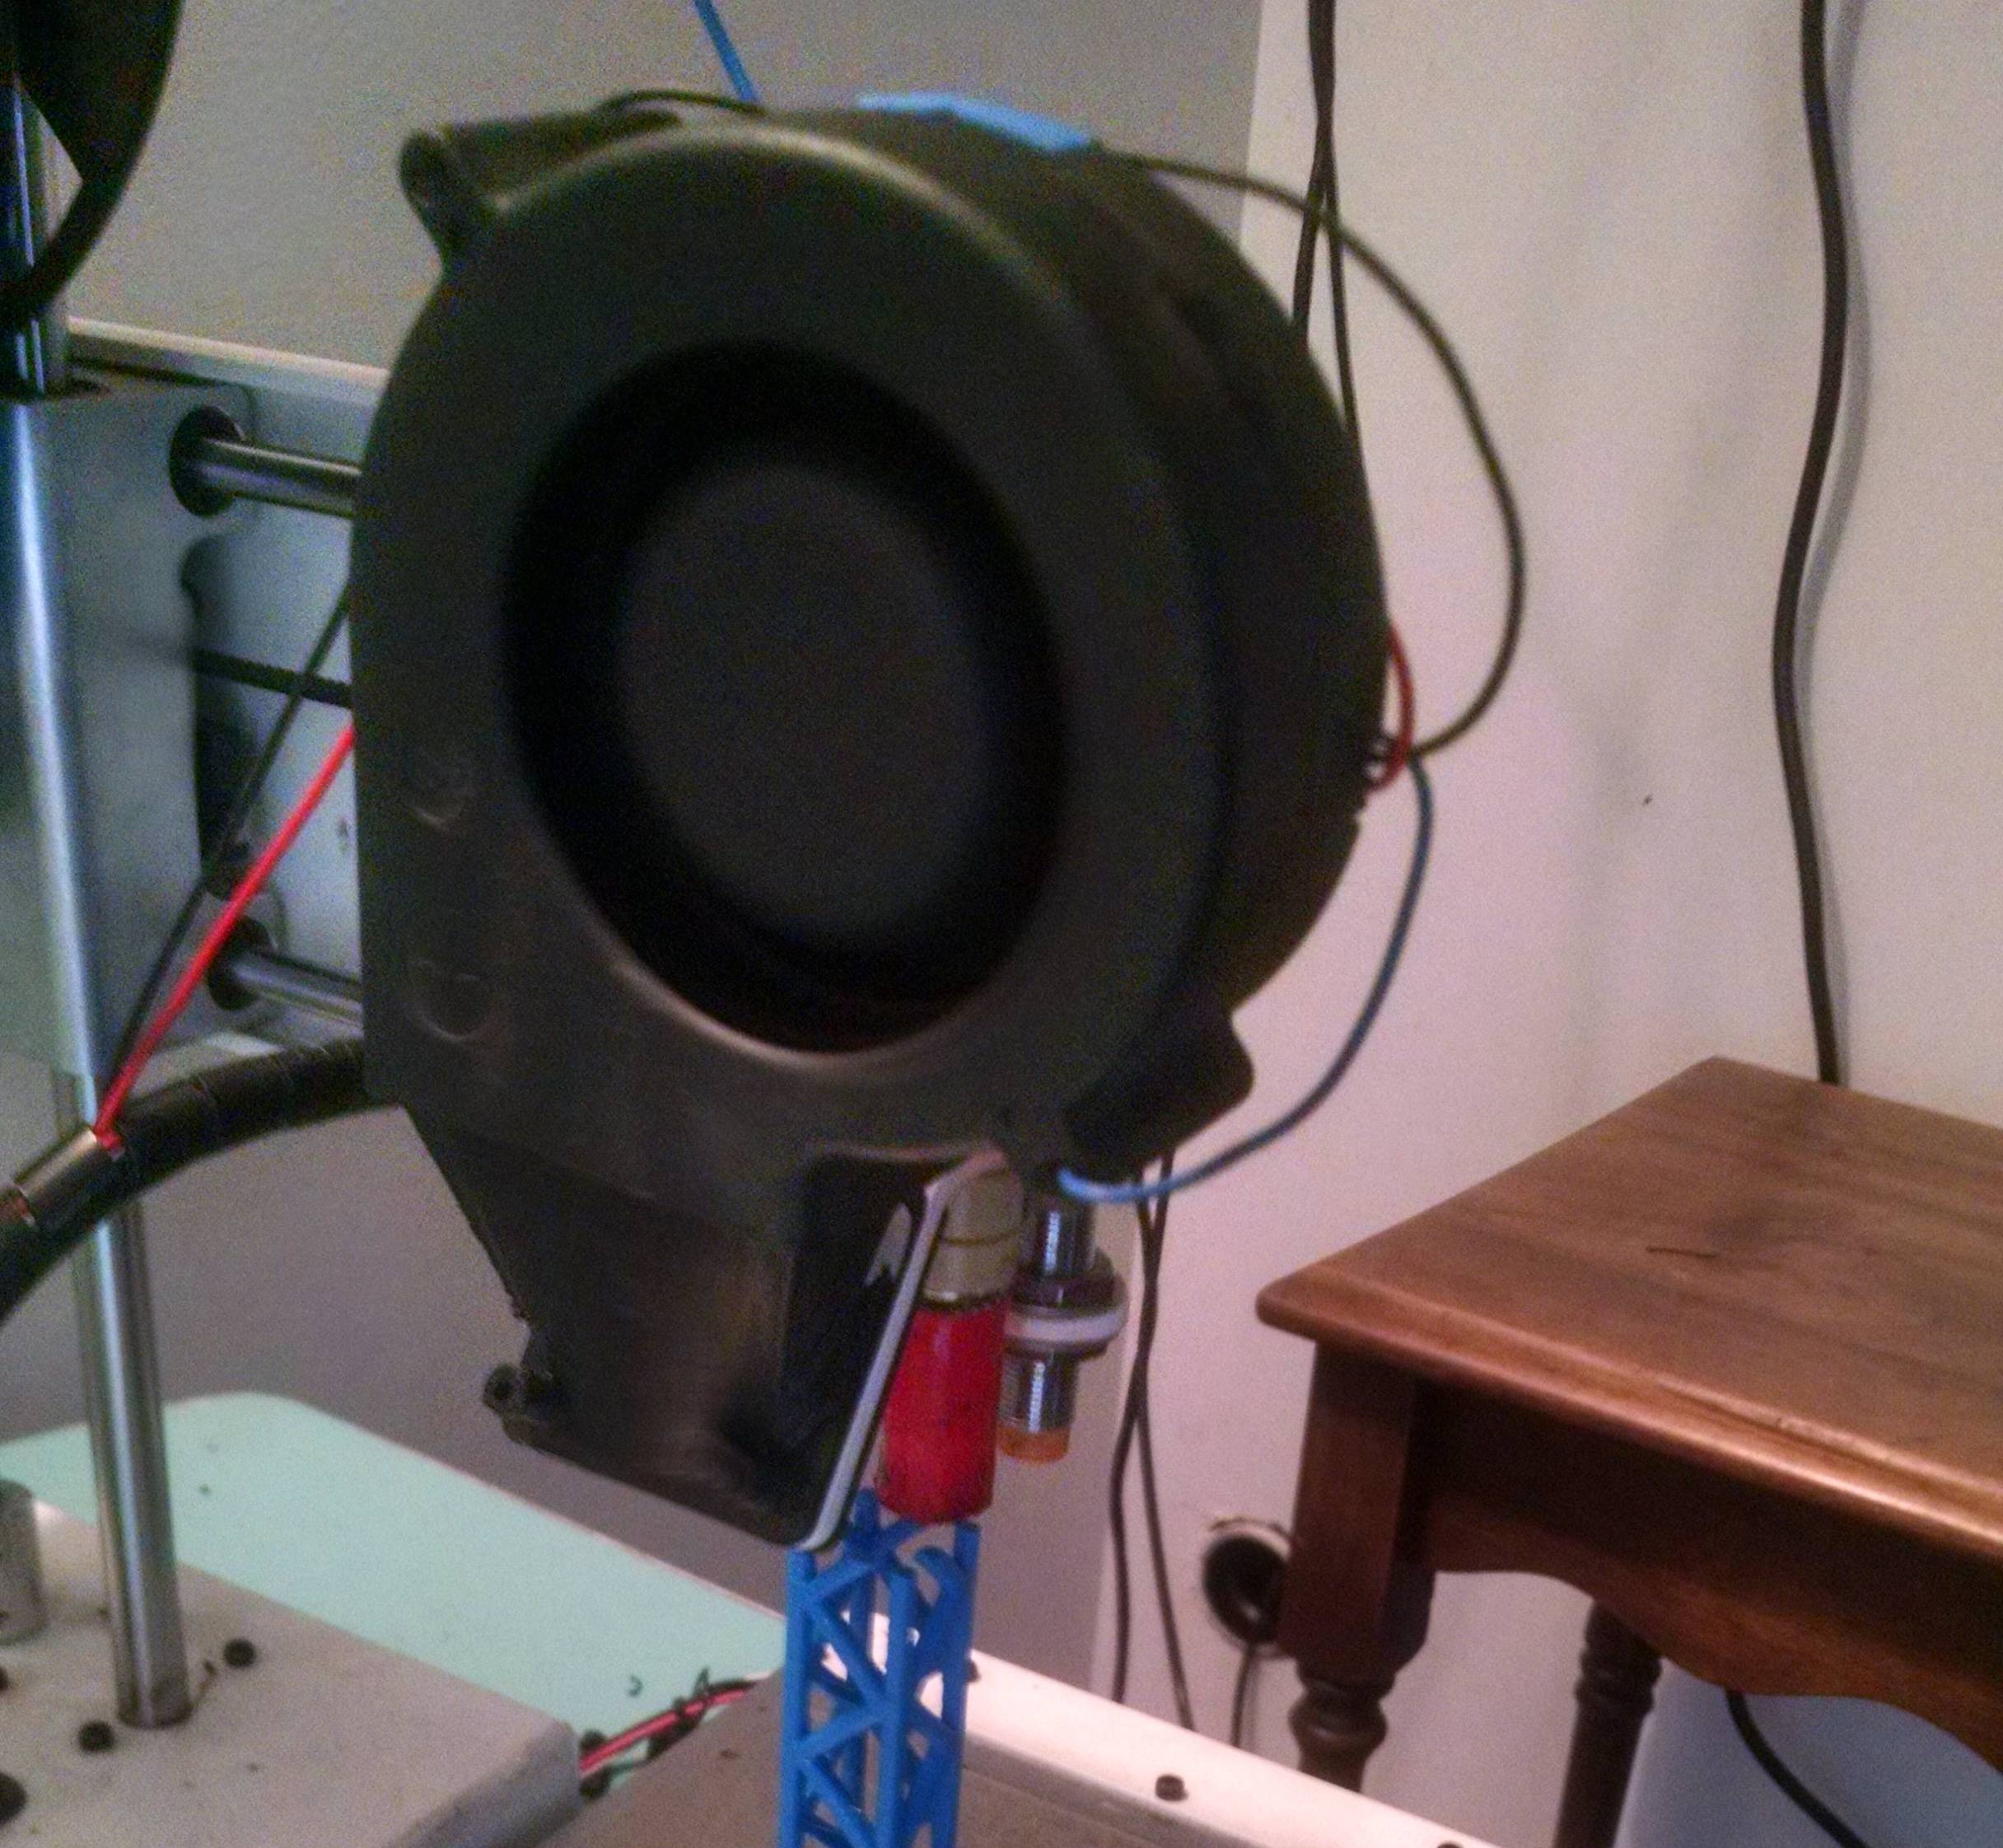  An extreme cooling system rigged up on a desktop 3D printer 